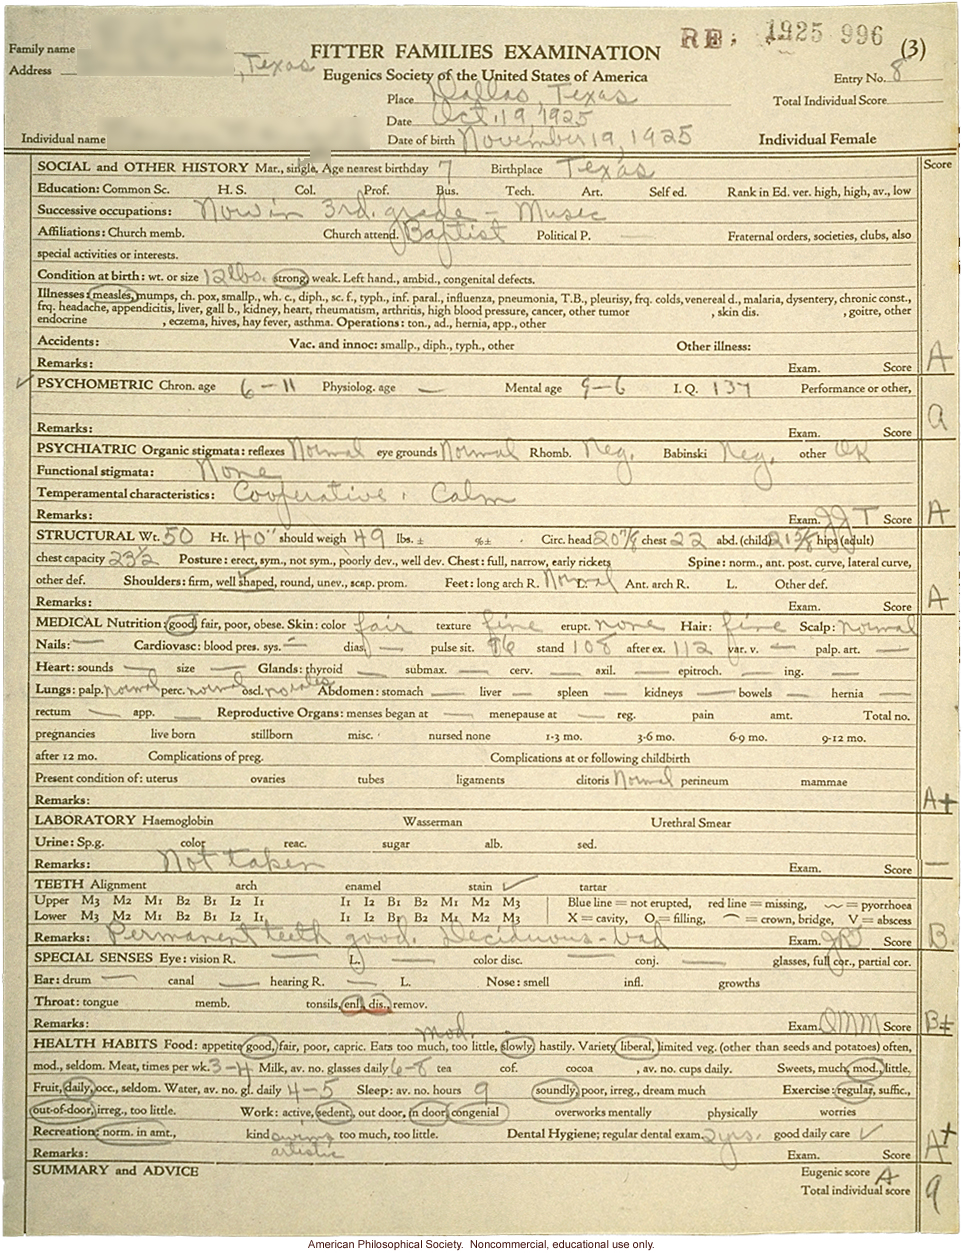 &quote;Large family&quote; winner, Fitter Families Contest, Texas State Fair (1925): individual examinations